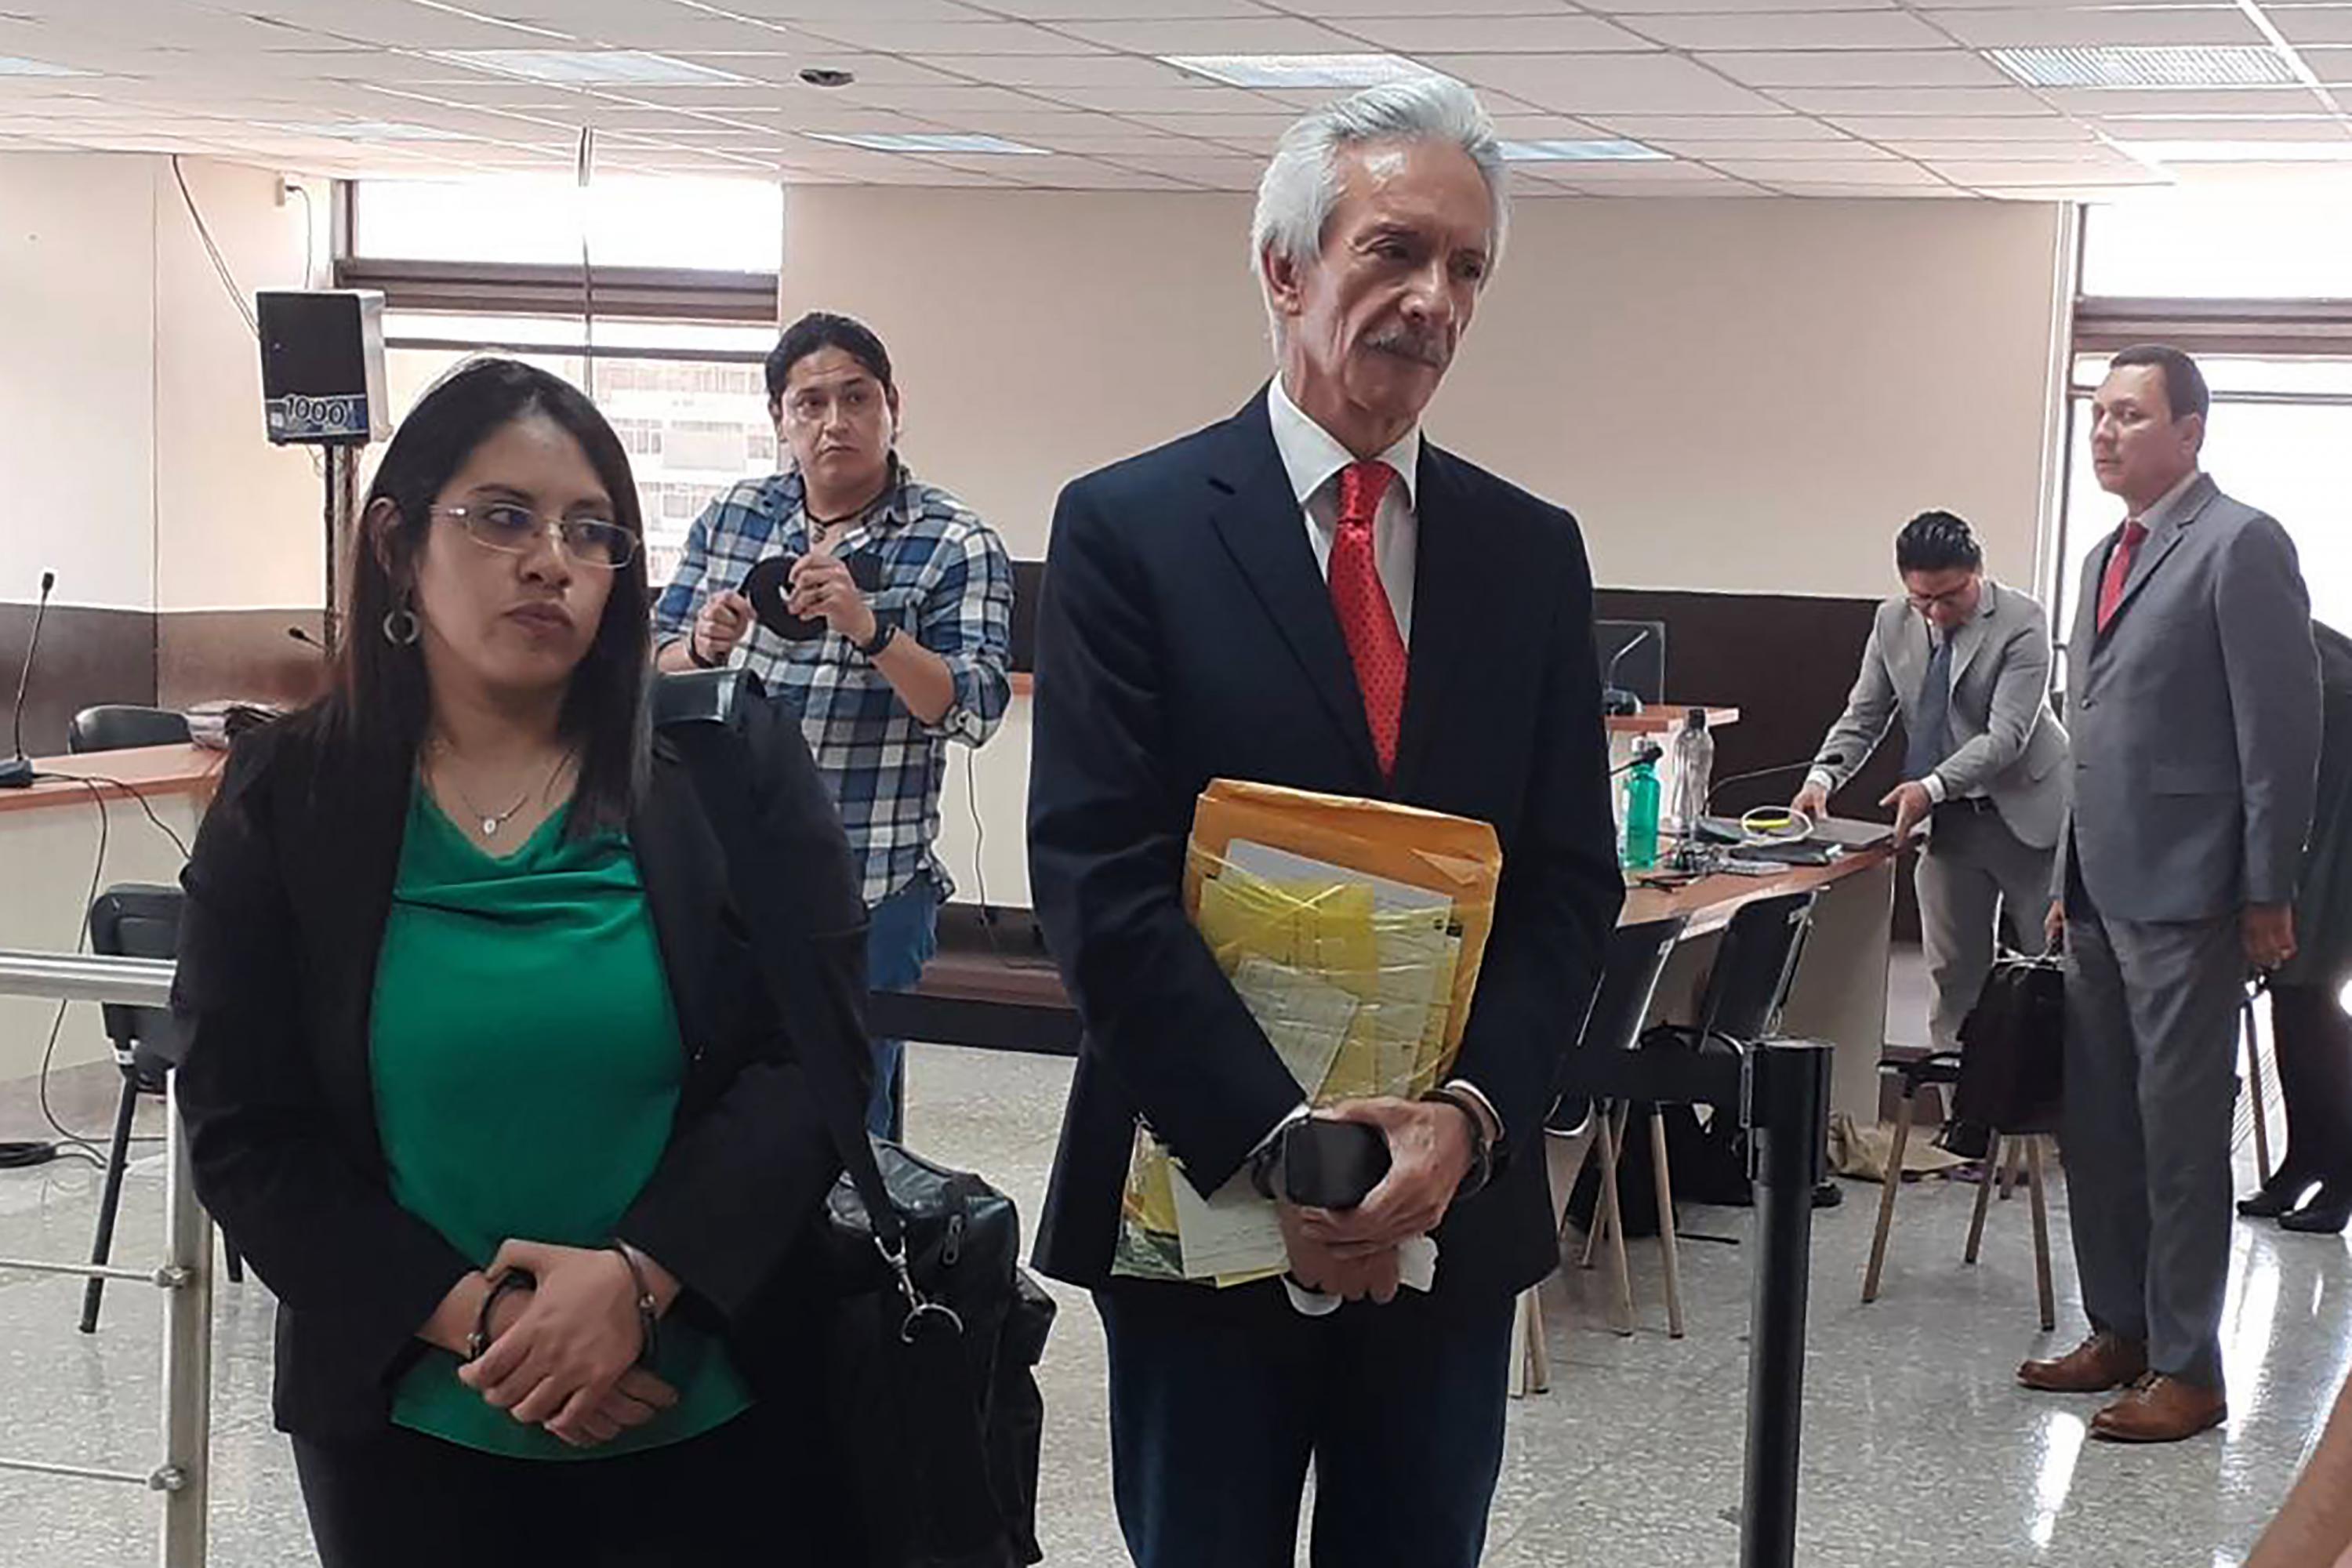 José Rubén Zamora (center) speaks with the press during his trial in May 2023 alongside former prosecutor Samari Gómez, accused in the same case of allegedly leaking confidential case information to Zamora. Raúl Falla (far right), lawyer for the Foundation Against Terrorism and the attorney of key state witness Ronald García Navarijo, watches in the background. Photo Julie López